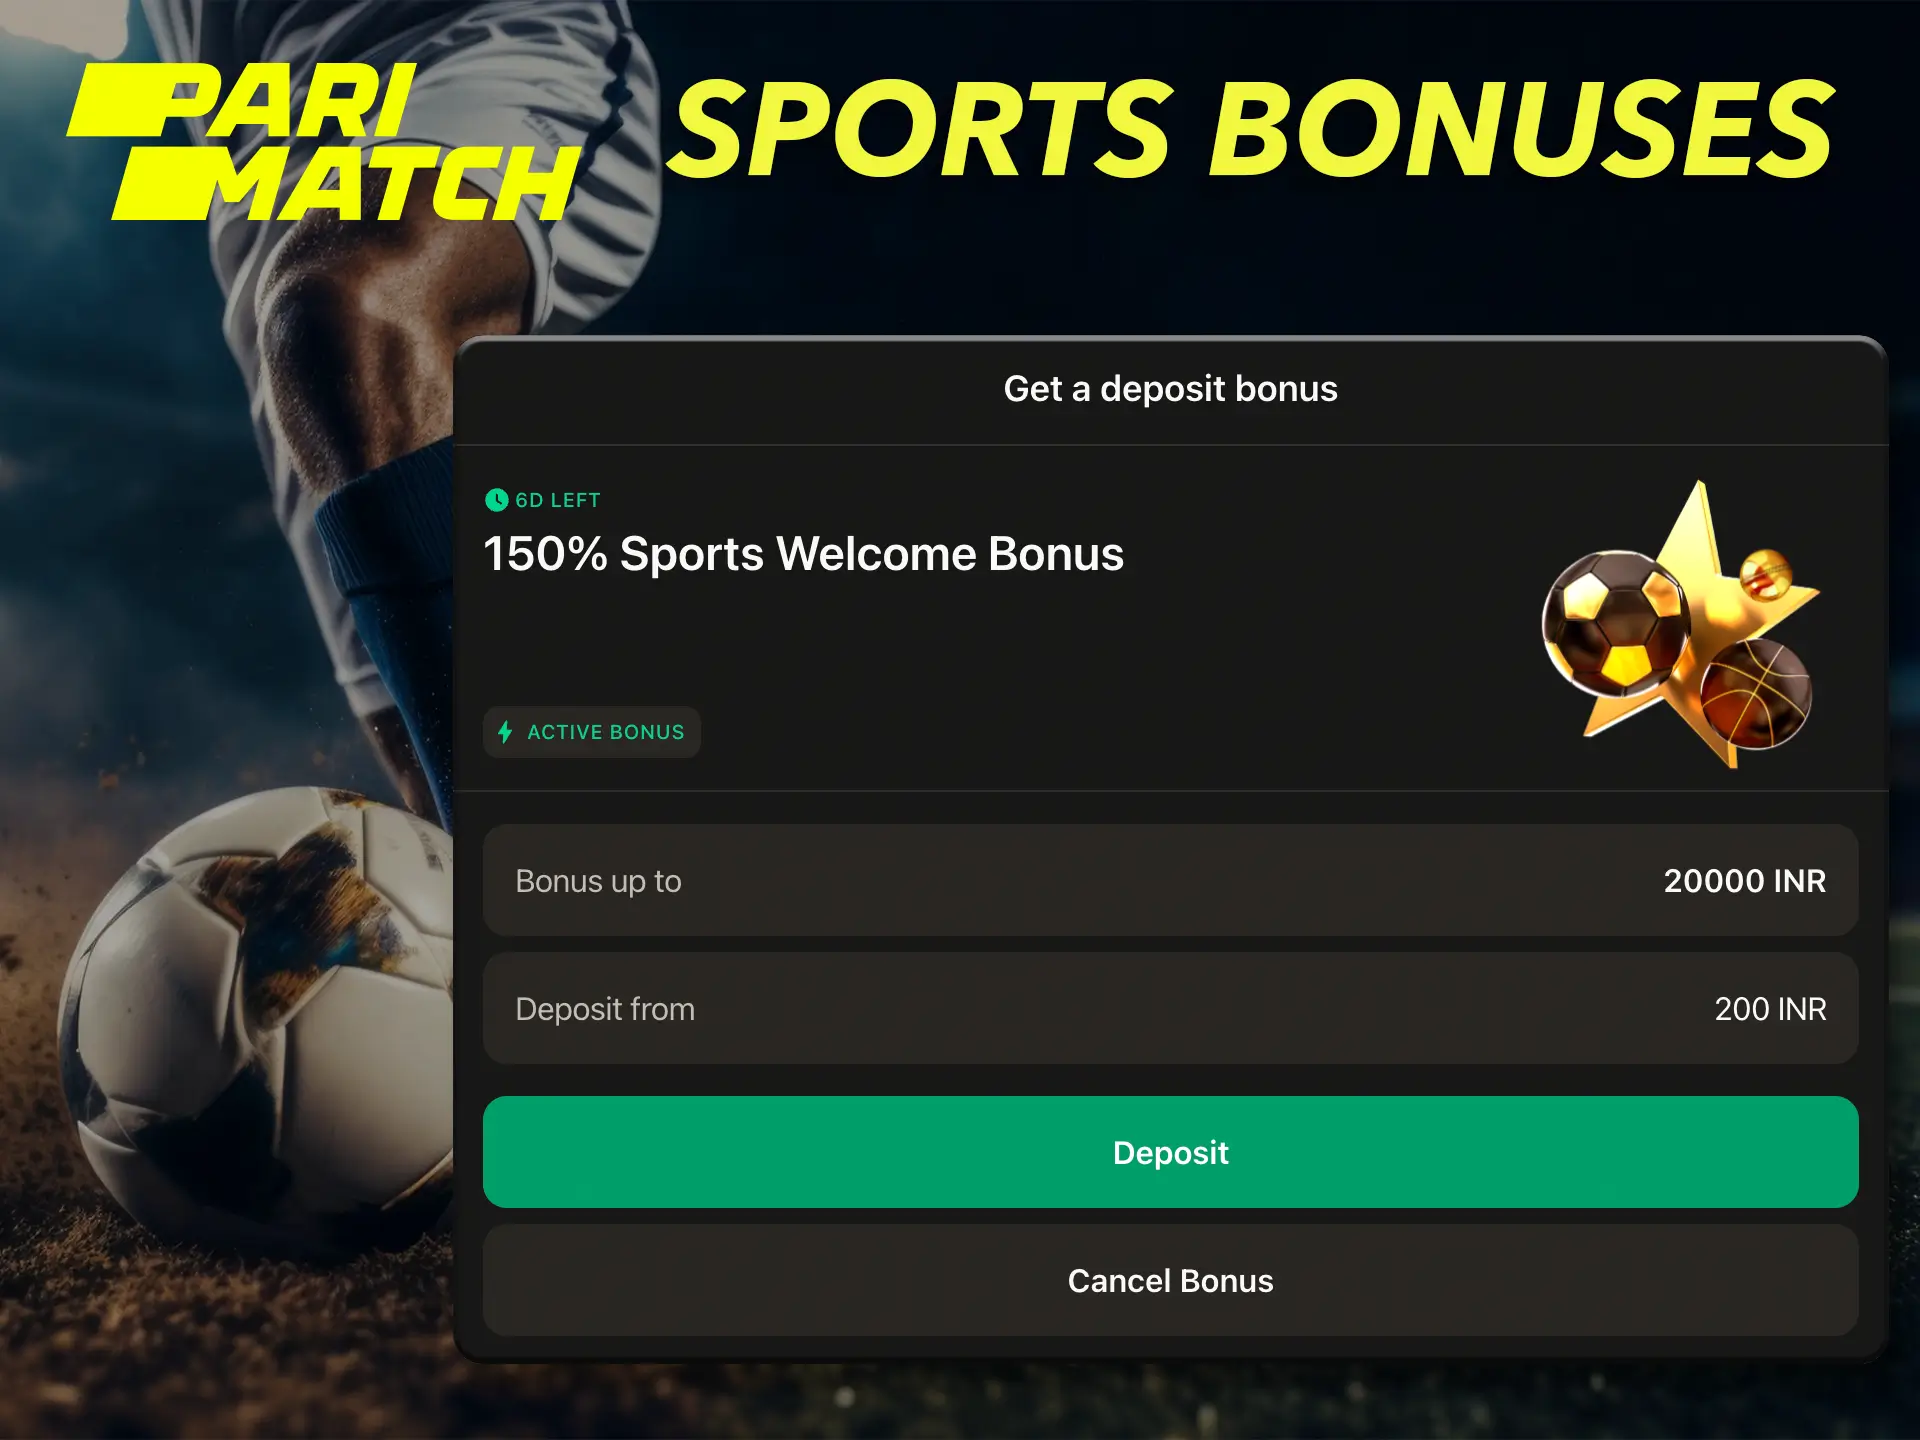 Use the unique bonus offer for sports betting from Parimatch.